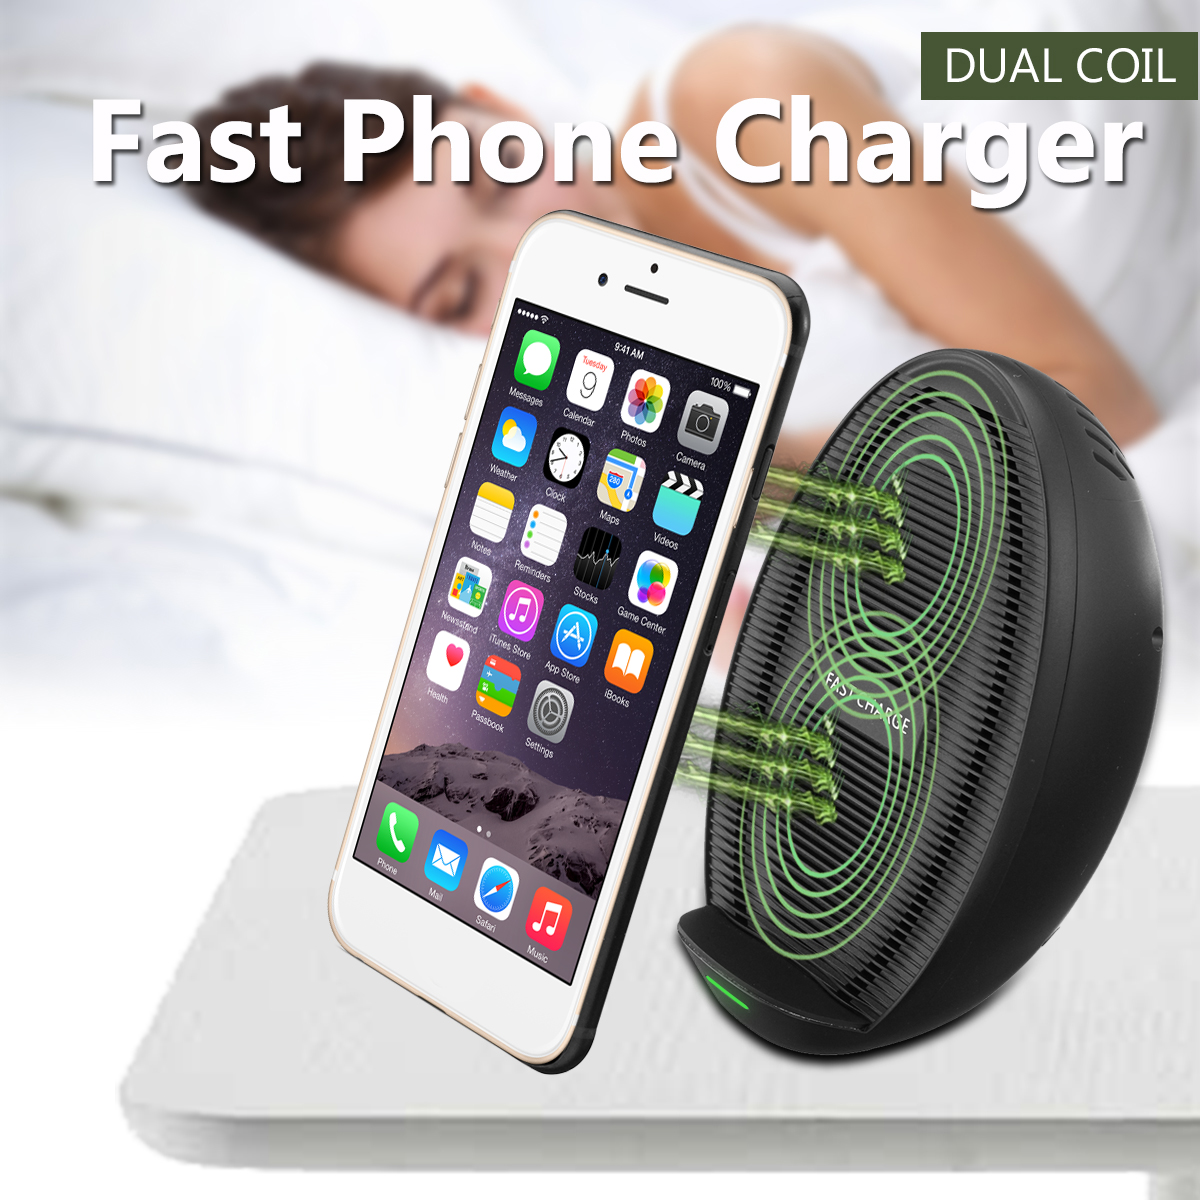 Wireless-Qi-Fast-Stand-Charger-Dual-Coil-With-Fan-For-Samsung-S8-iPhone-8-Plus-X-1264550-2